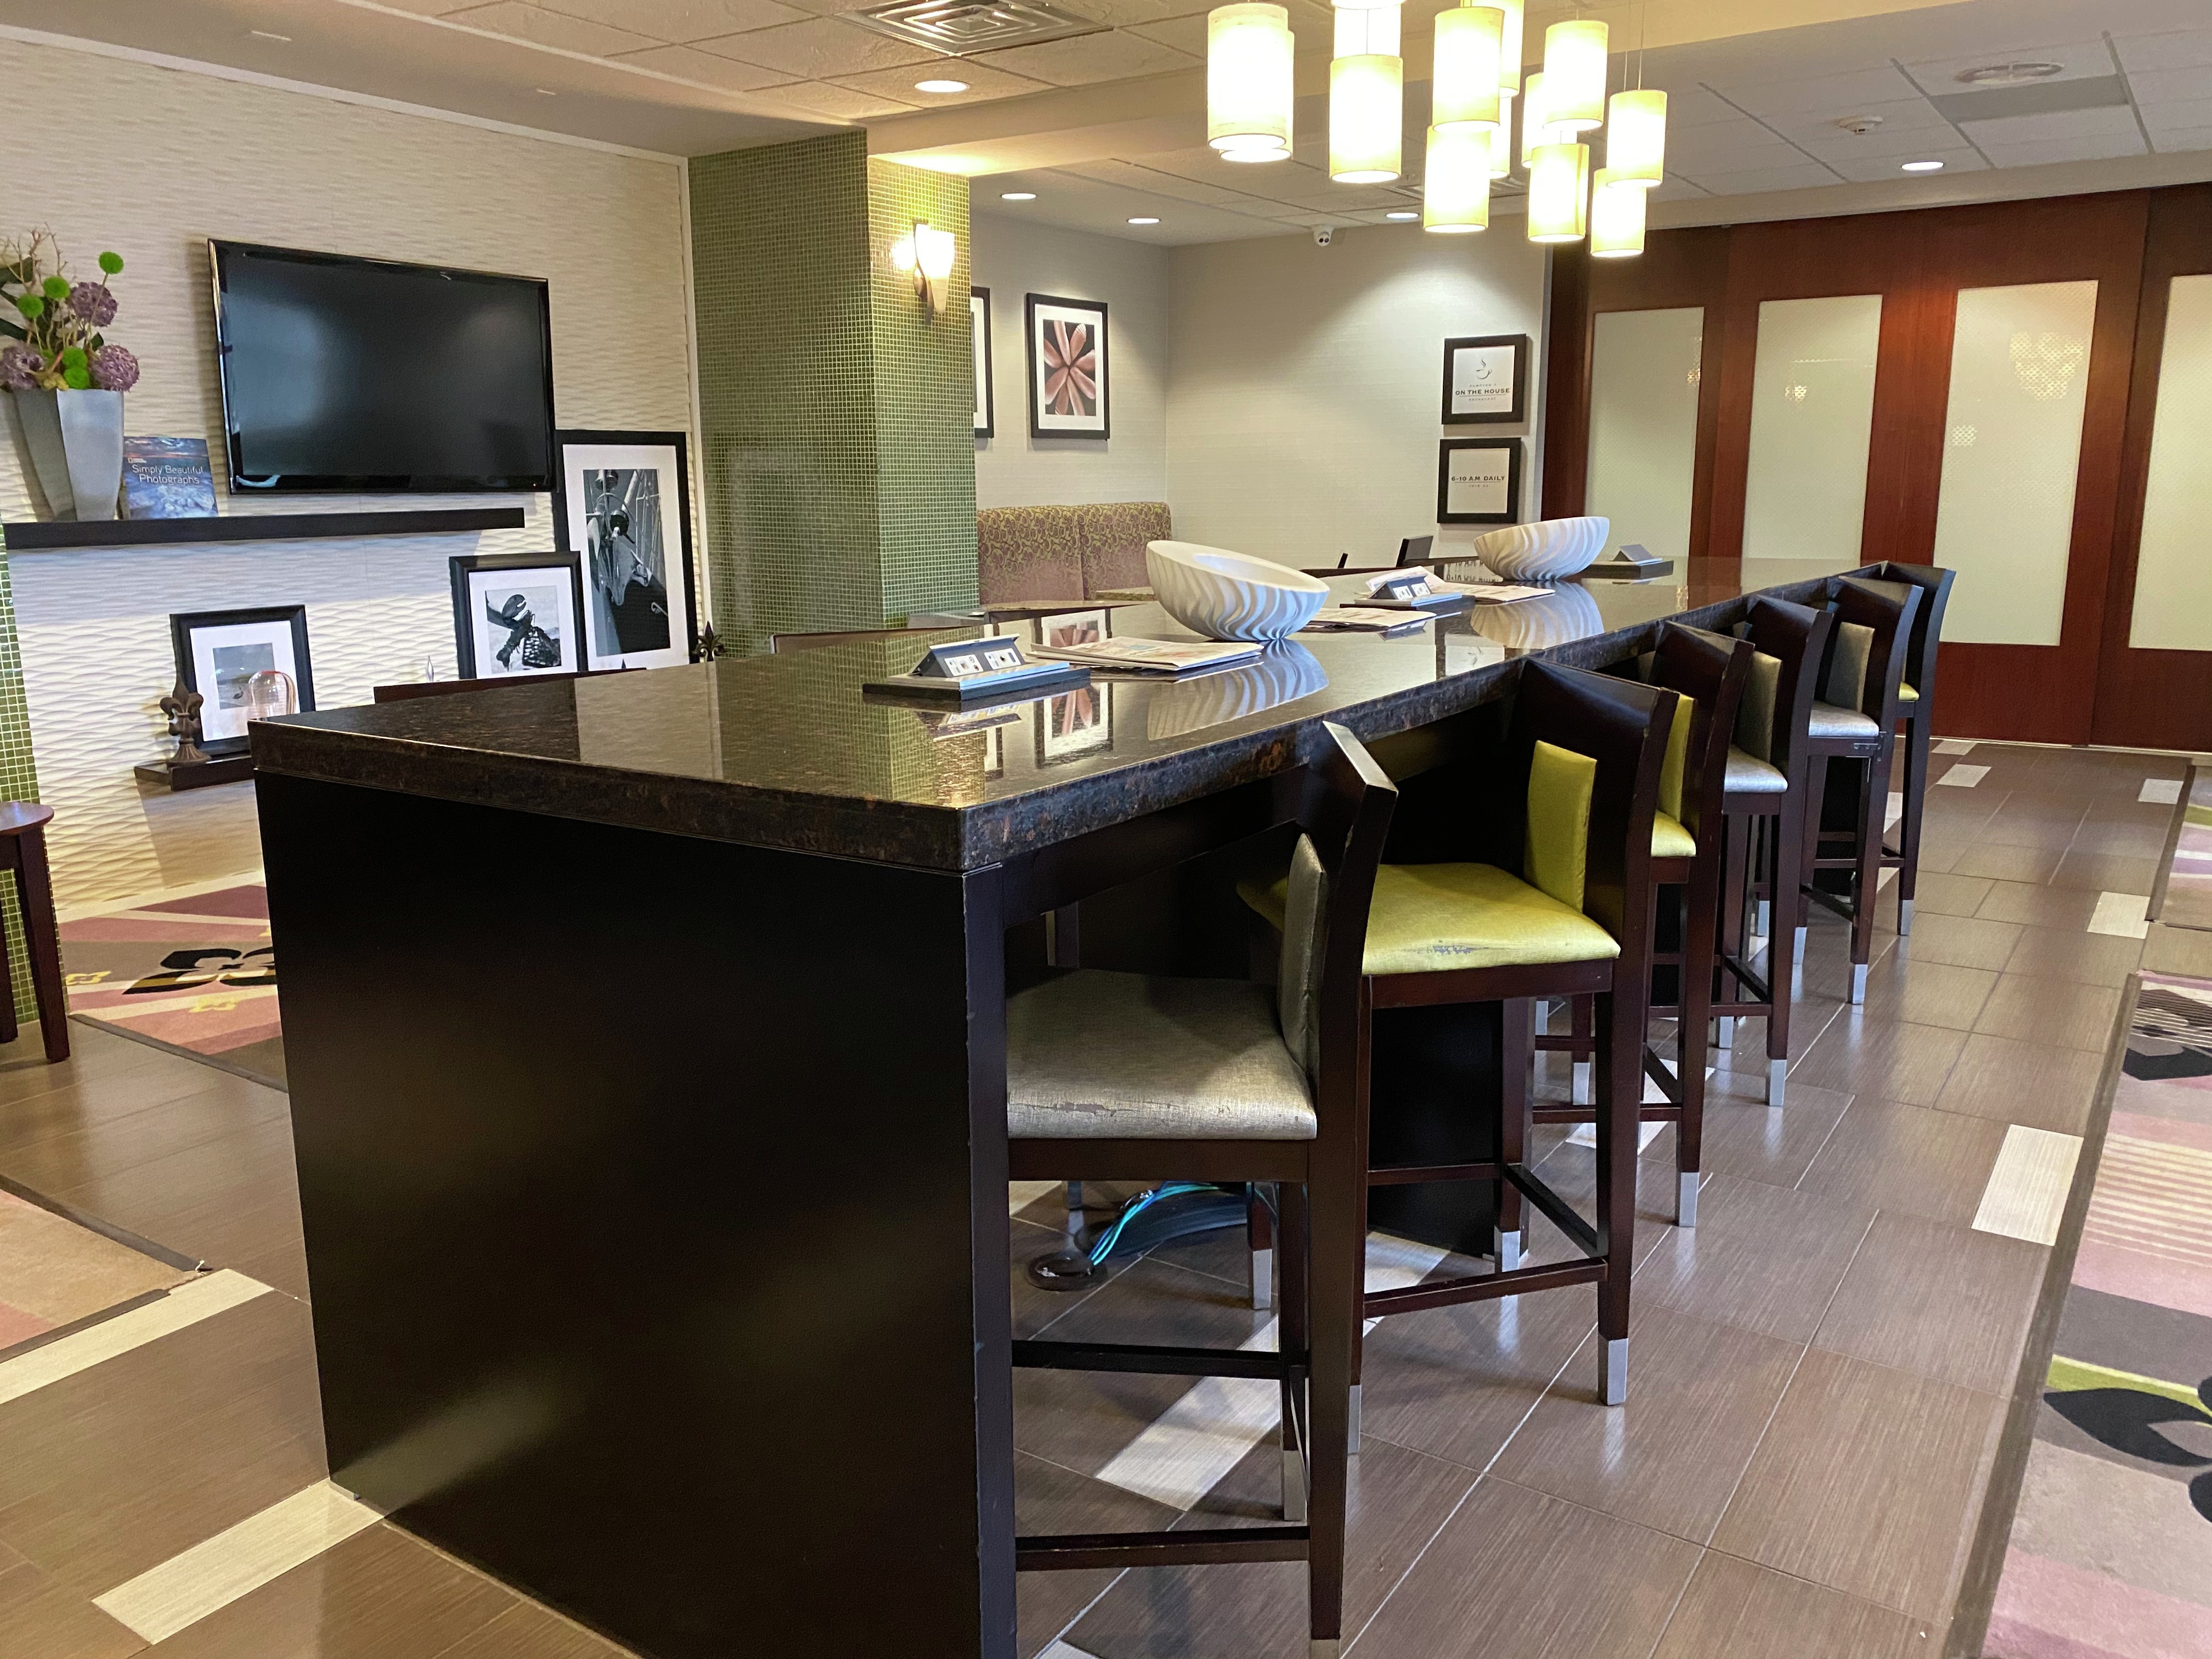 Lobby Bar Area with Stools, Tall Table and Wall Mounted TV